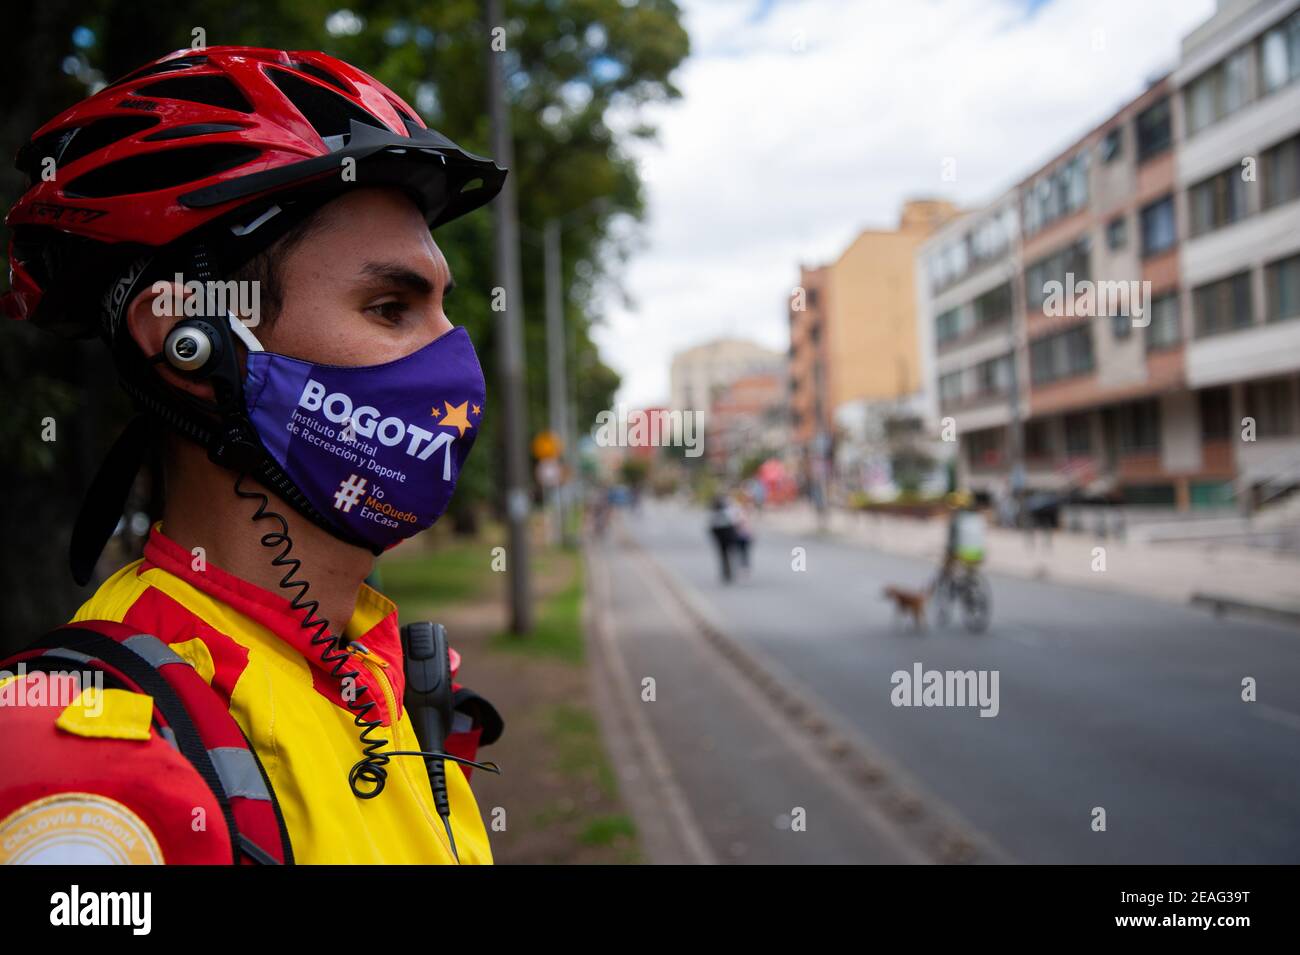 People using protective face masks enjoy a sunday of Ciclovia after its return amid the second wave of the novel Coronavirus pandemic in Colombia. In Stock Photo